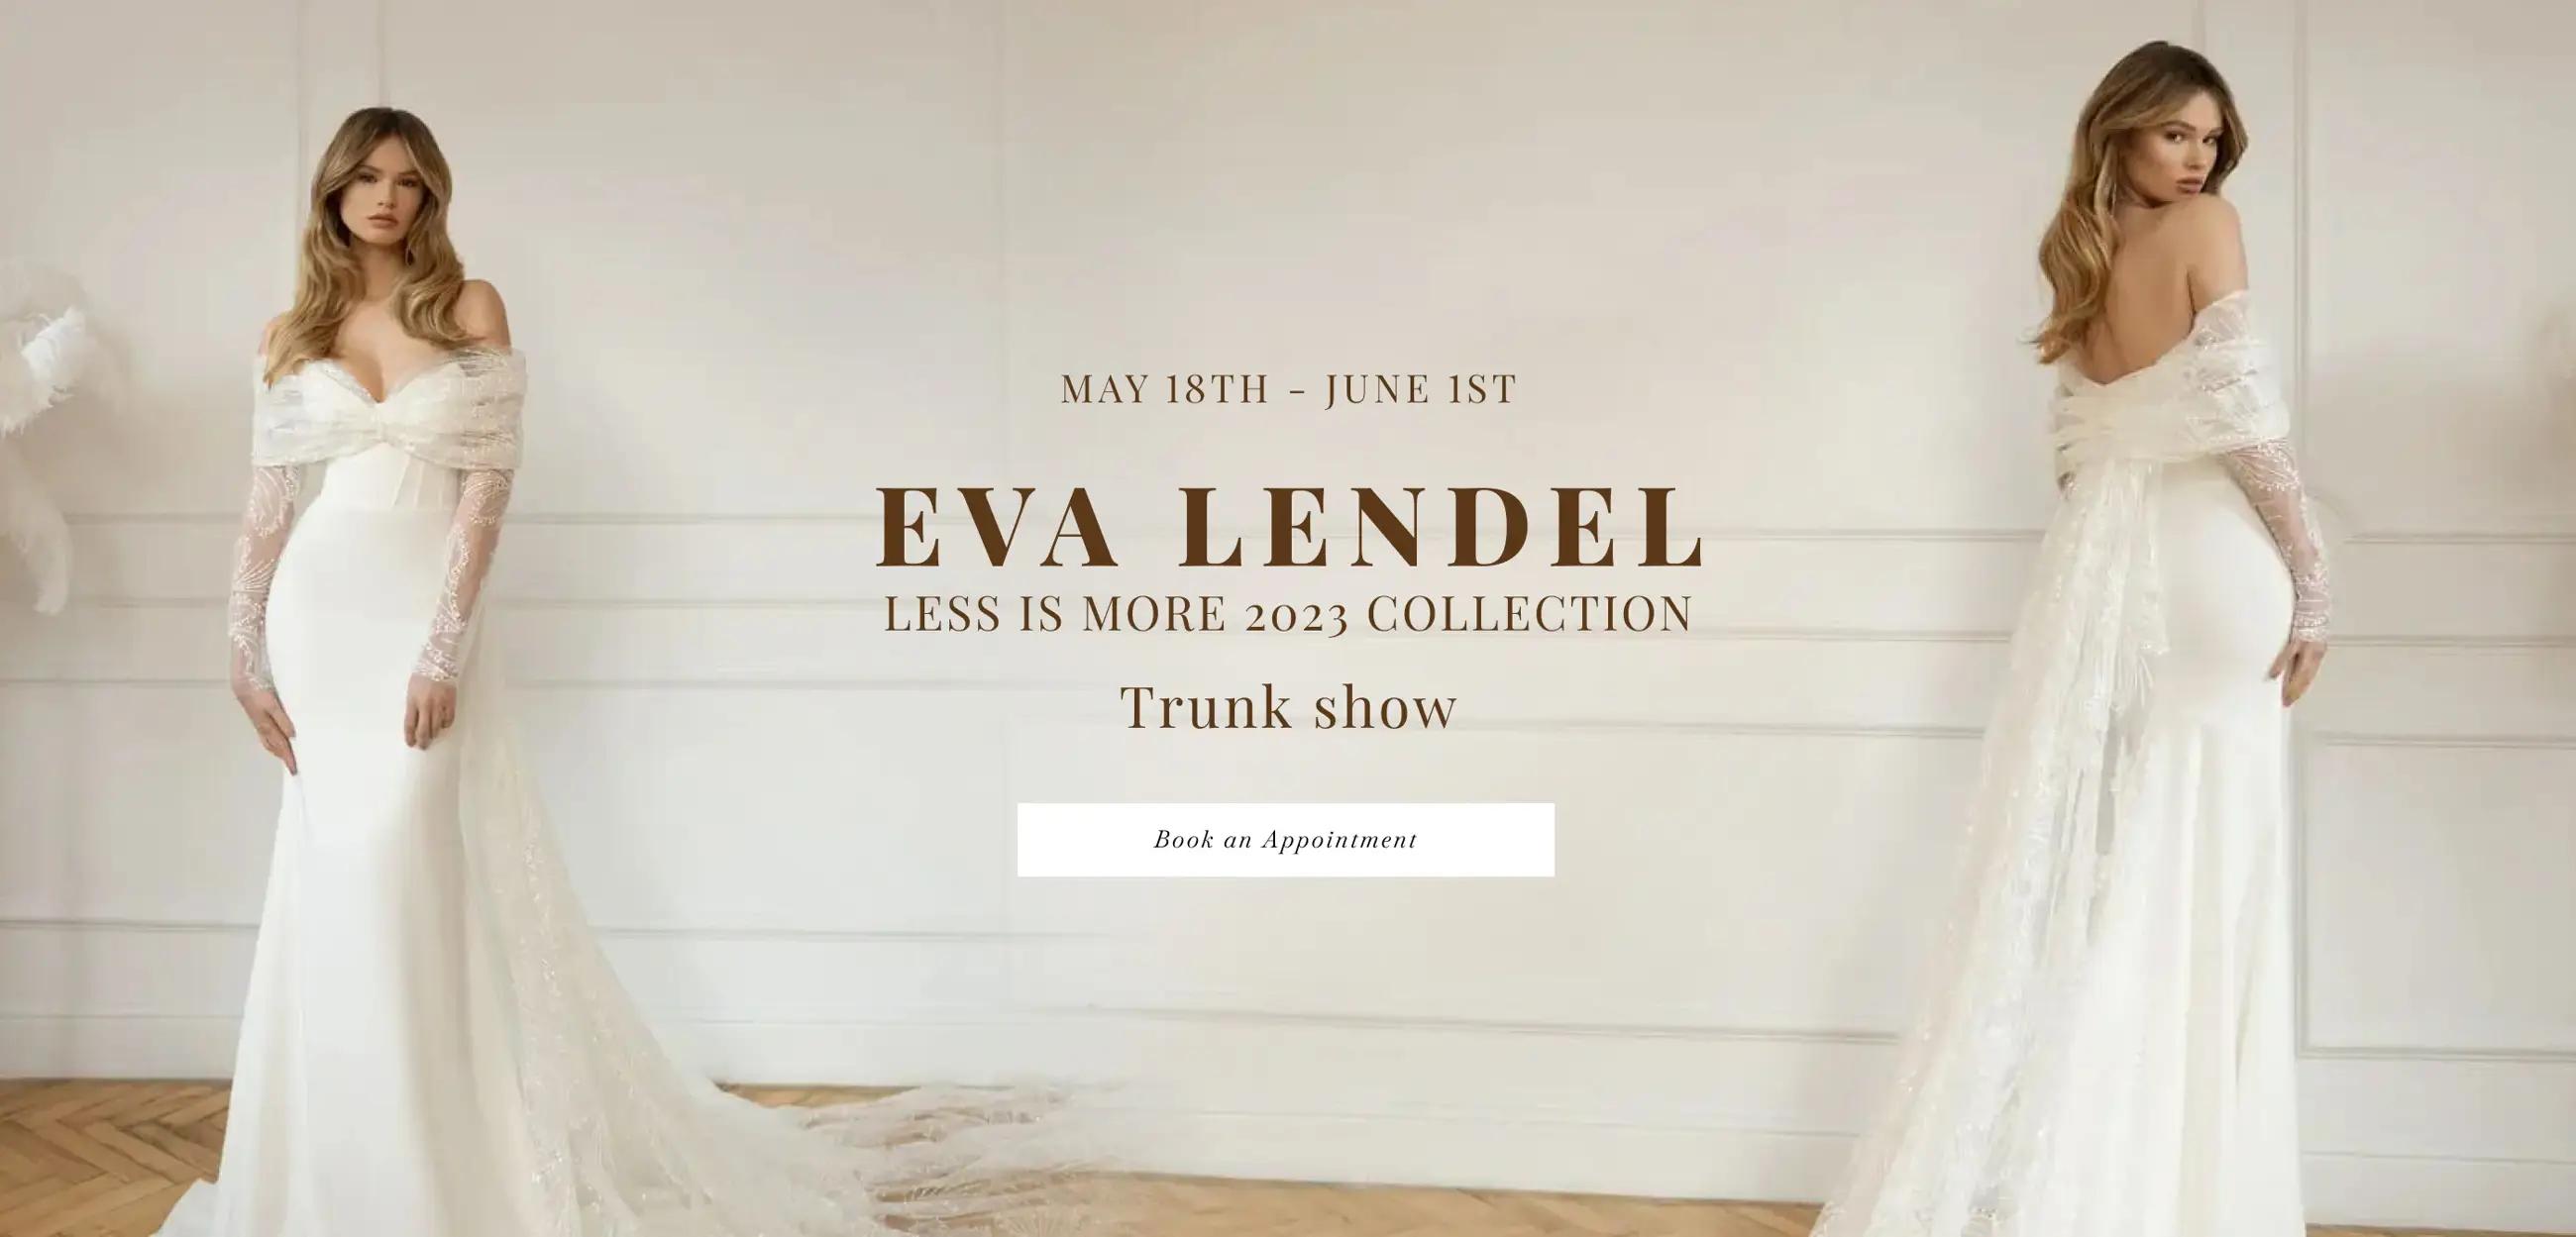 Eva Lendel Less is More 2023 Collection Trunk Show Banner